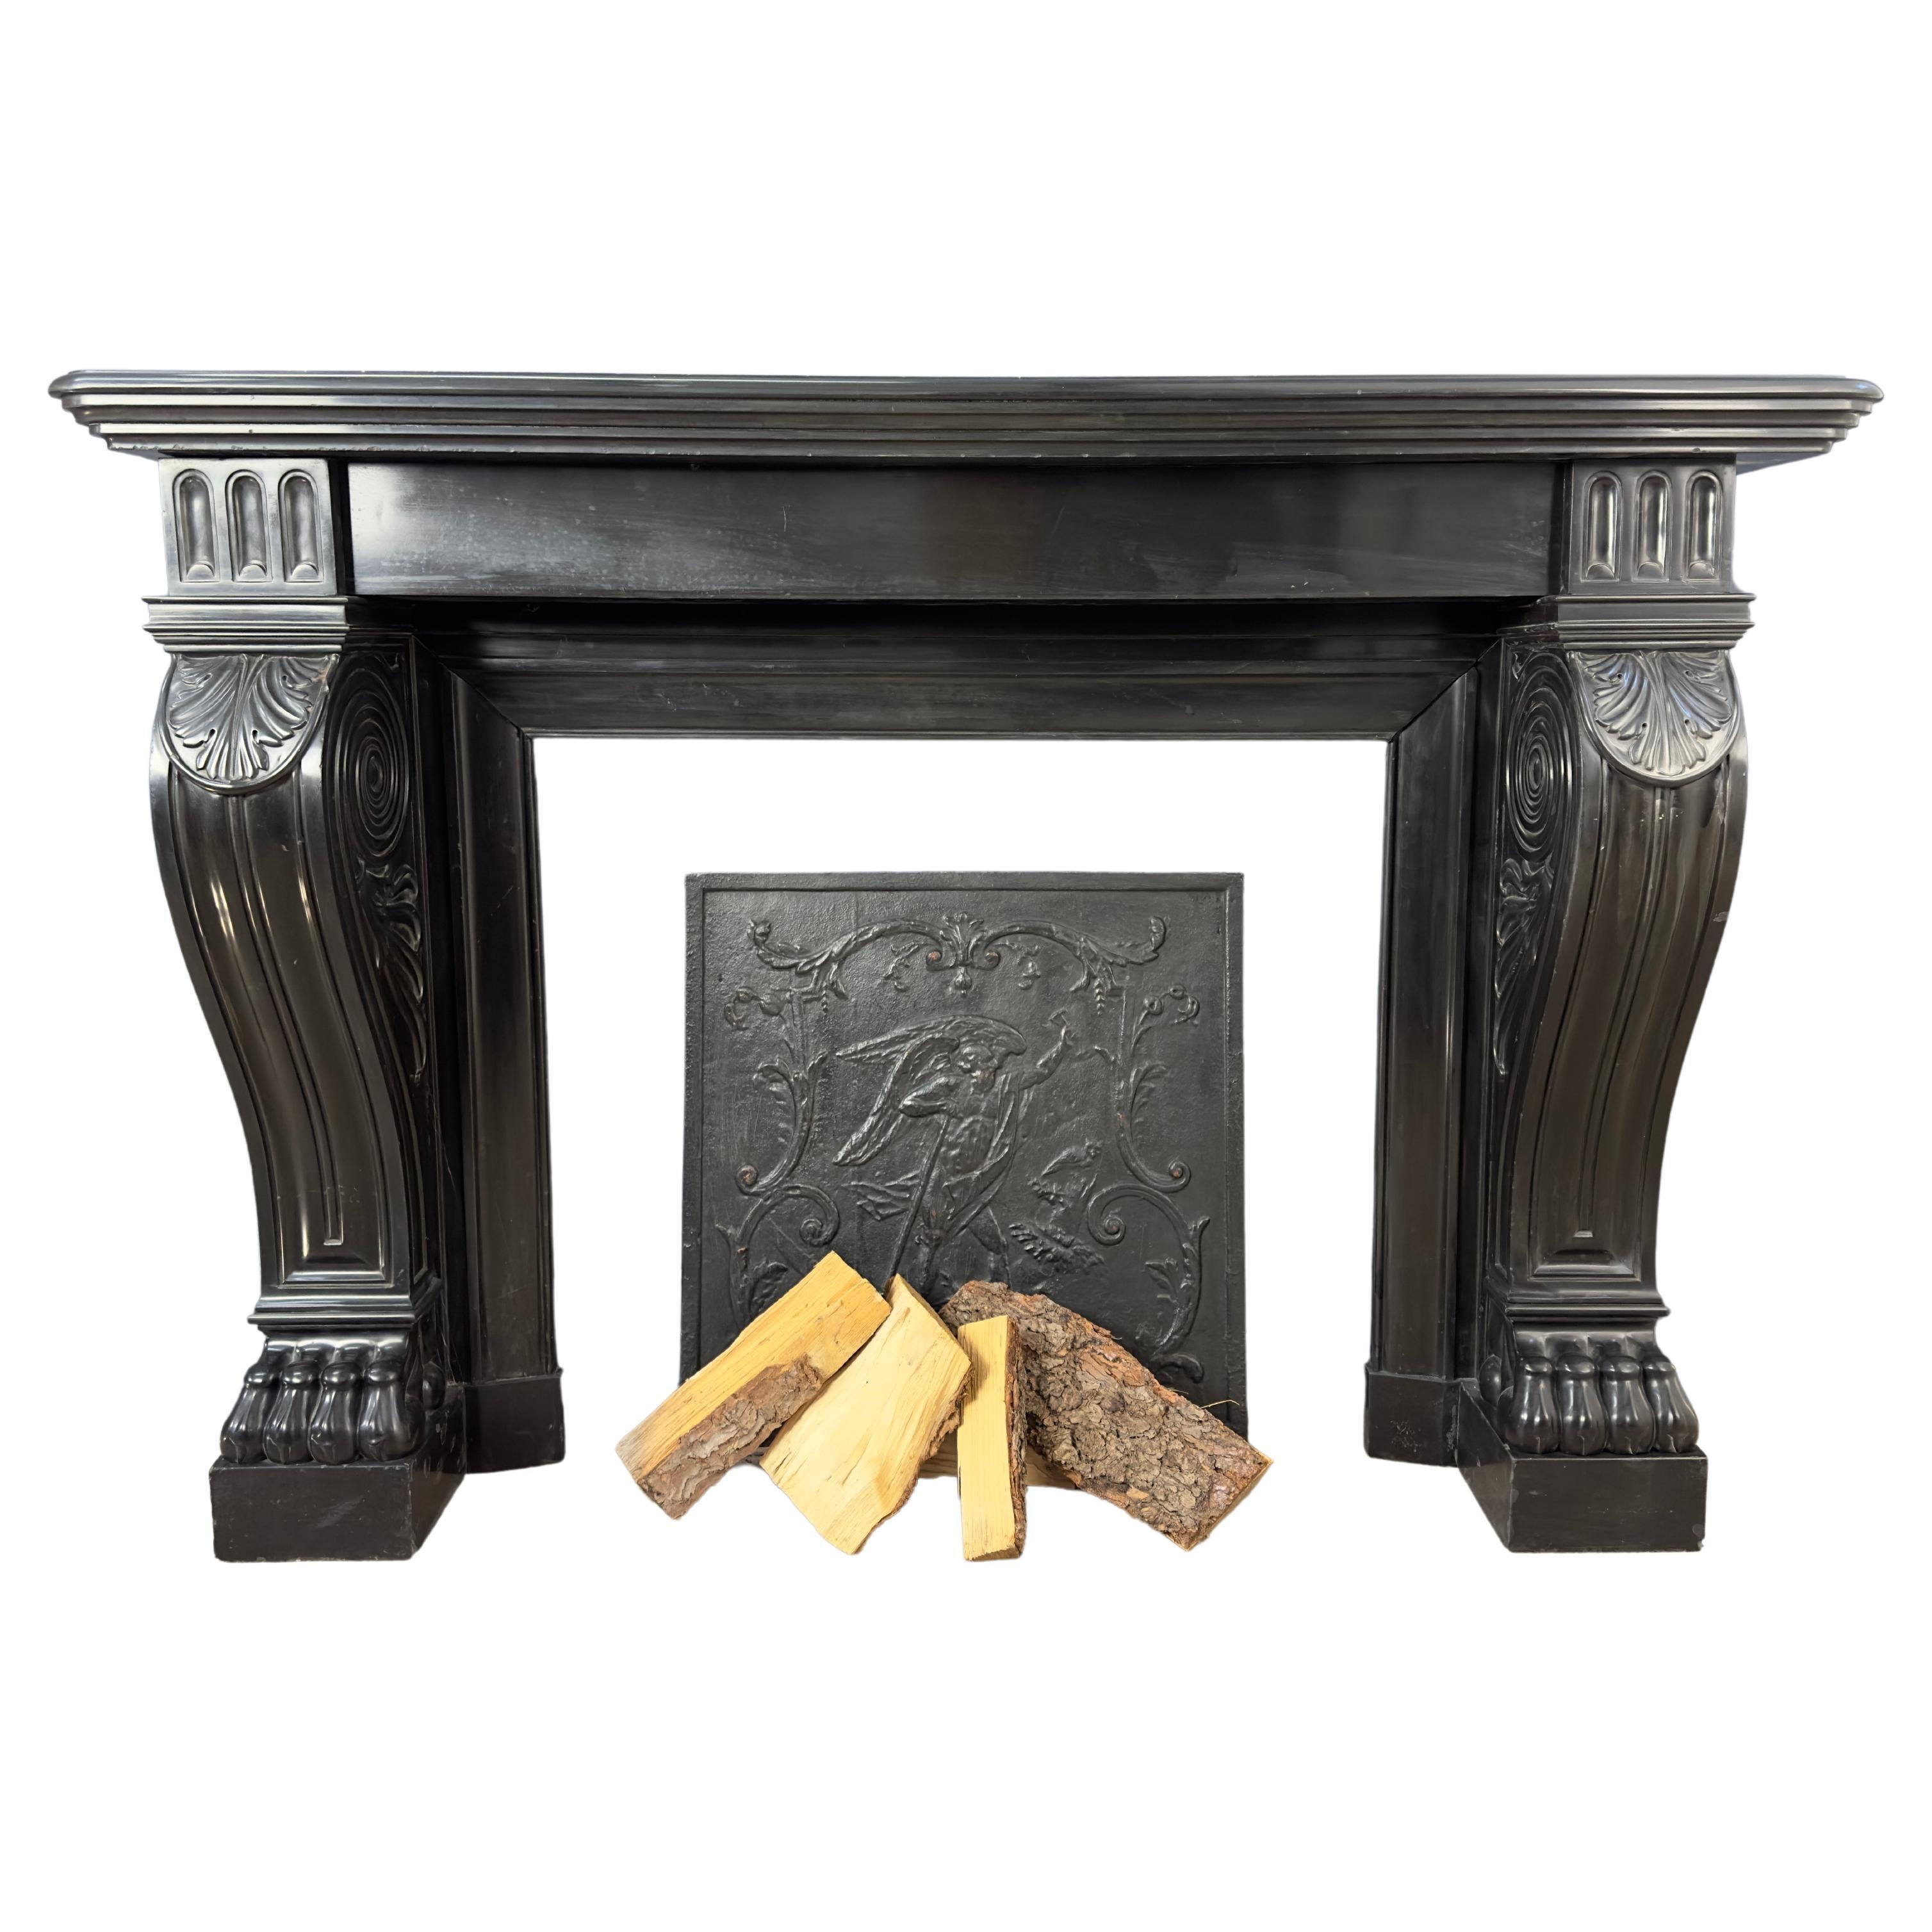 Gorgeous Richly Decorated Front Fireplace Surround in Noir De Mazy Black Marble For Sale